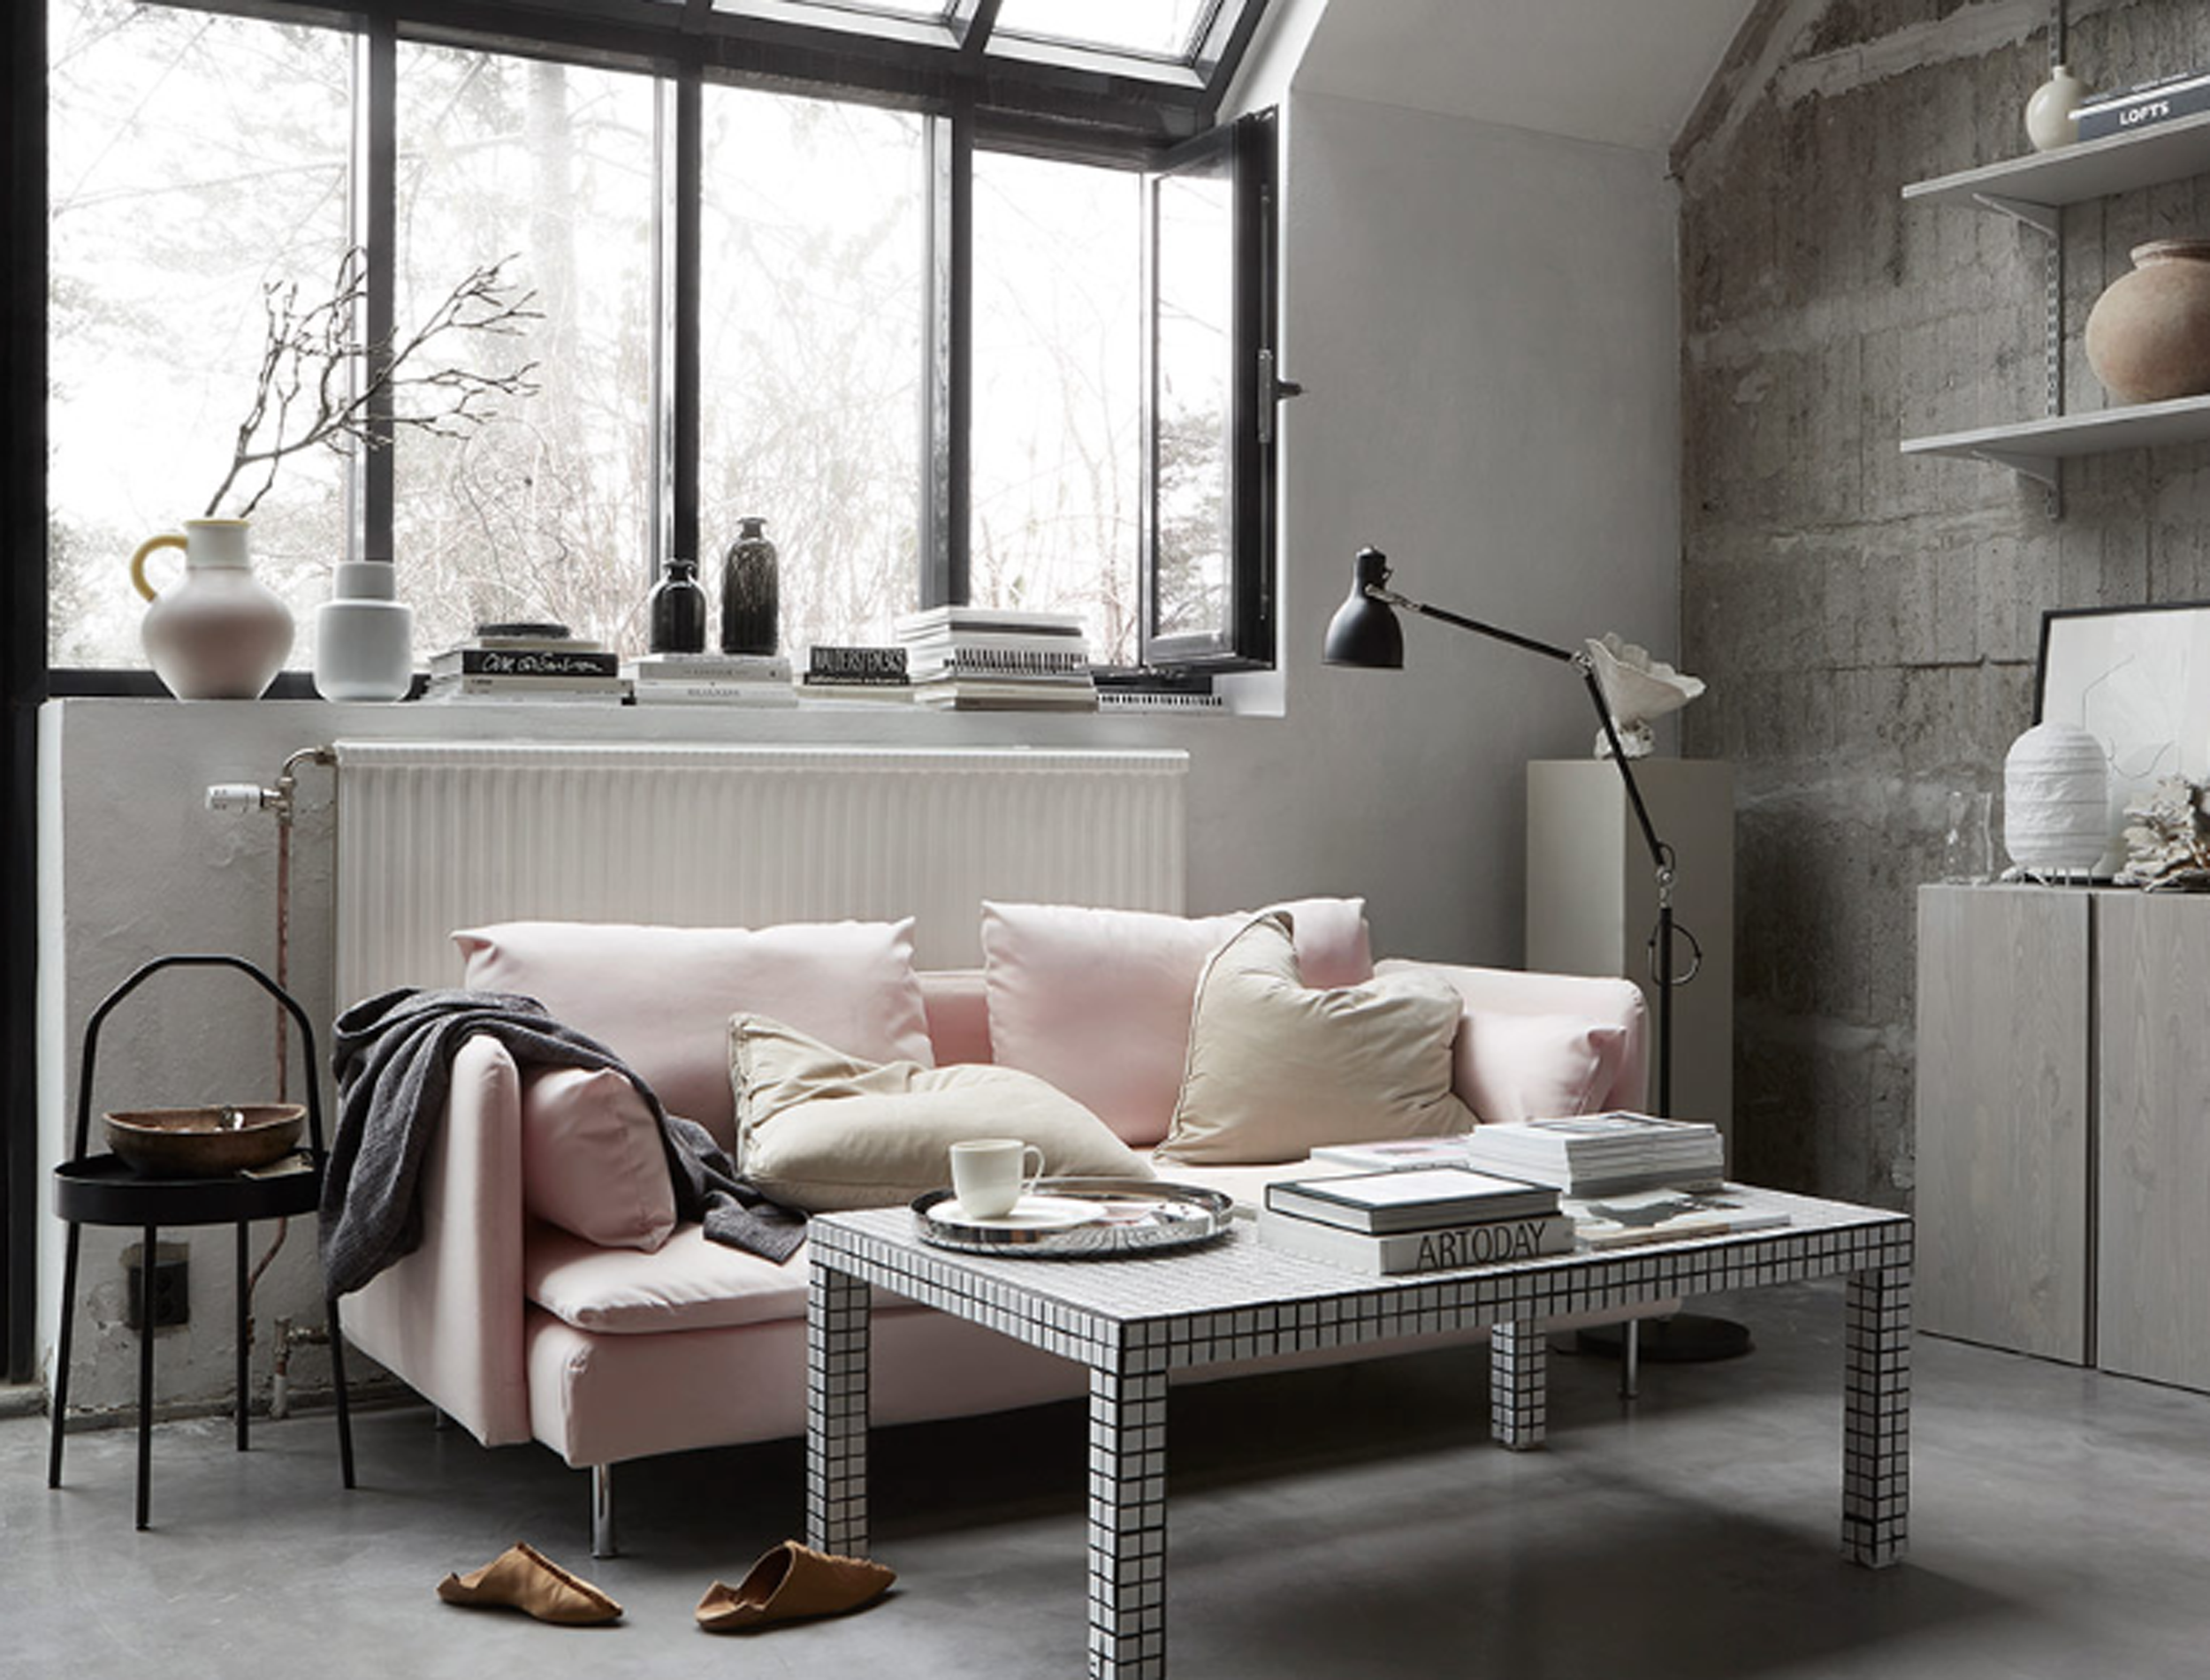 Discover Our Interior Design Styles - IKEA